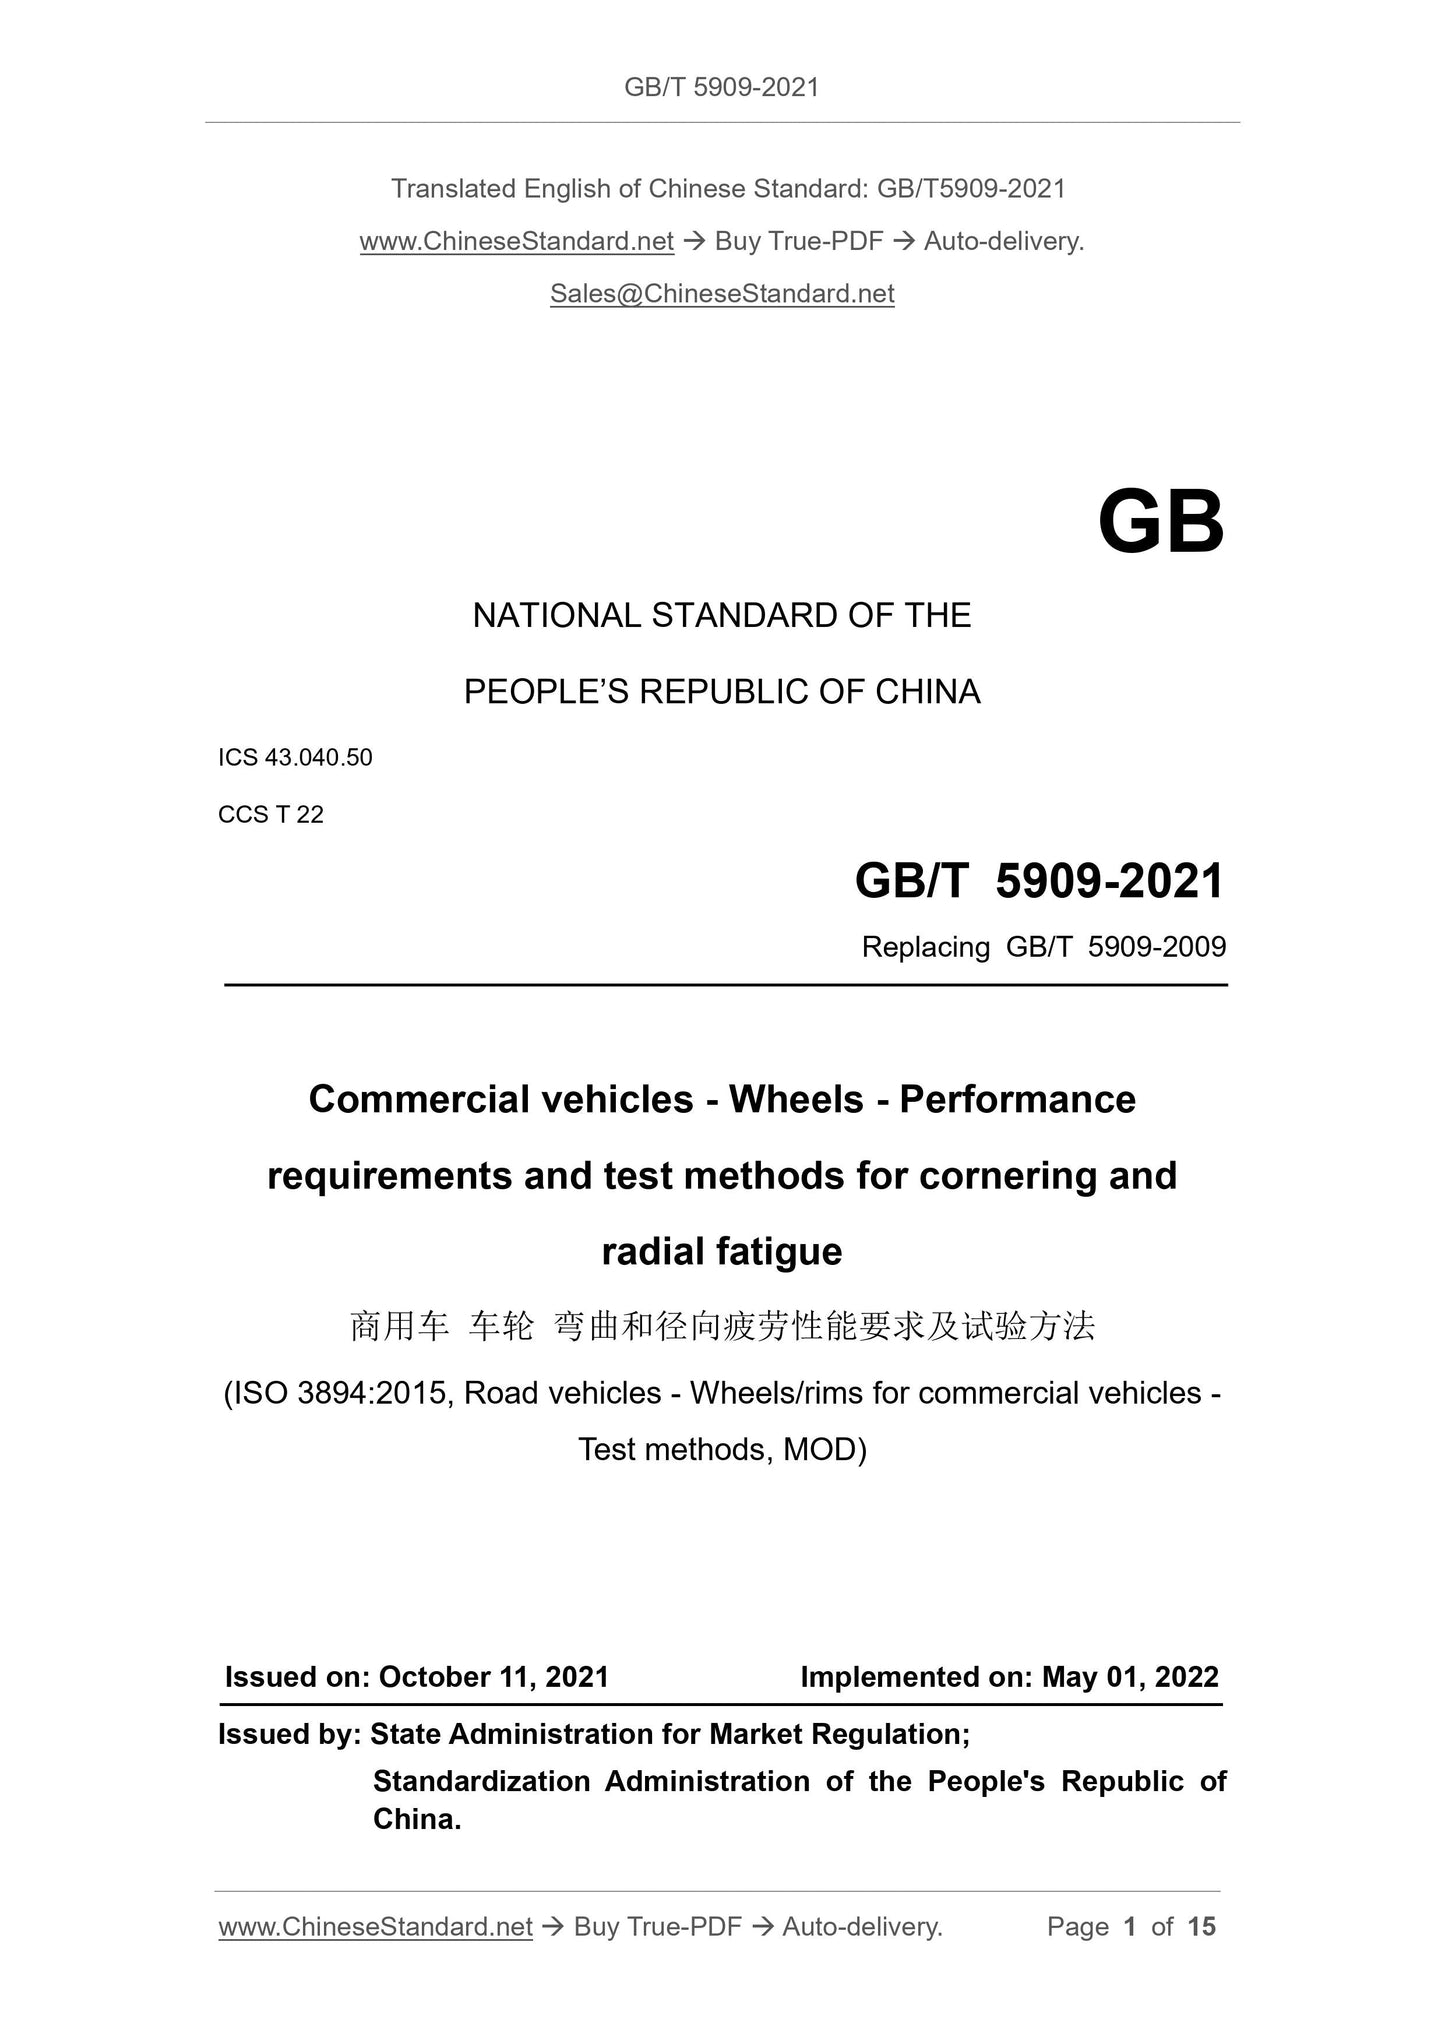 GB/T 5909-2021 Page 1